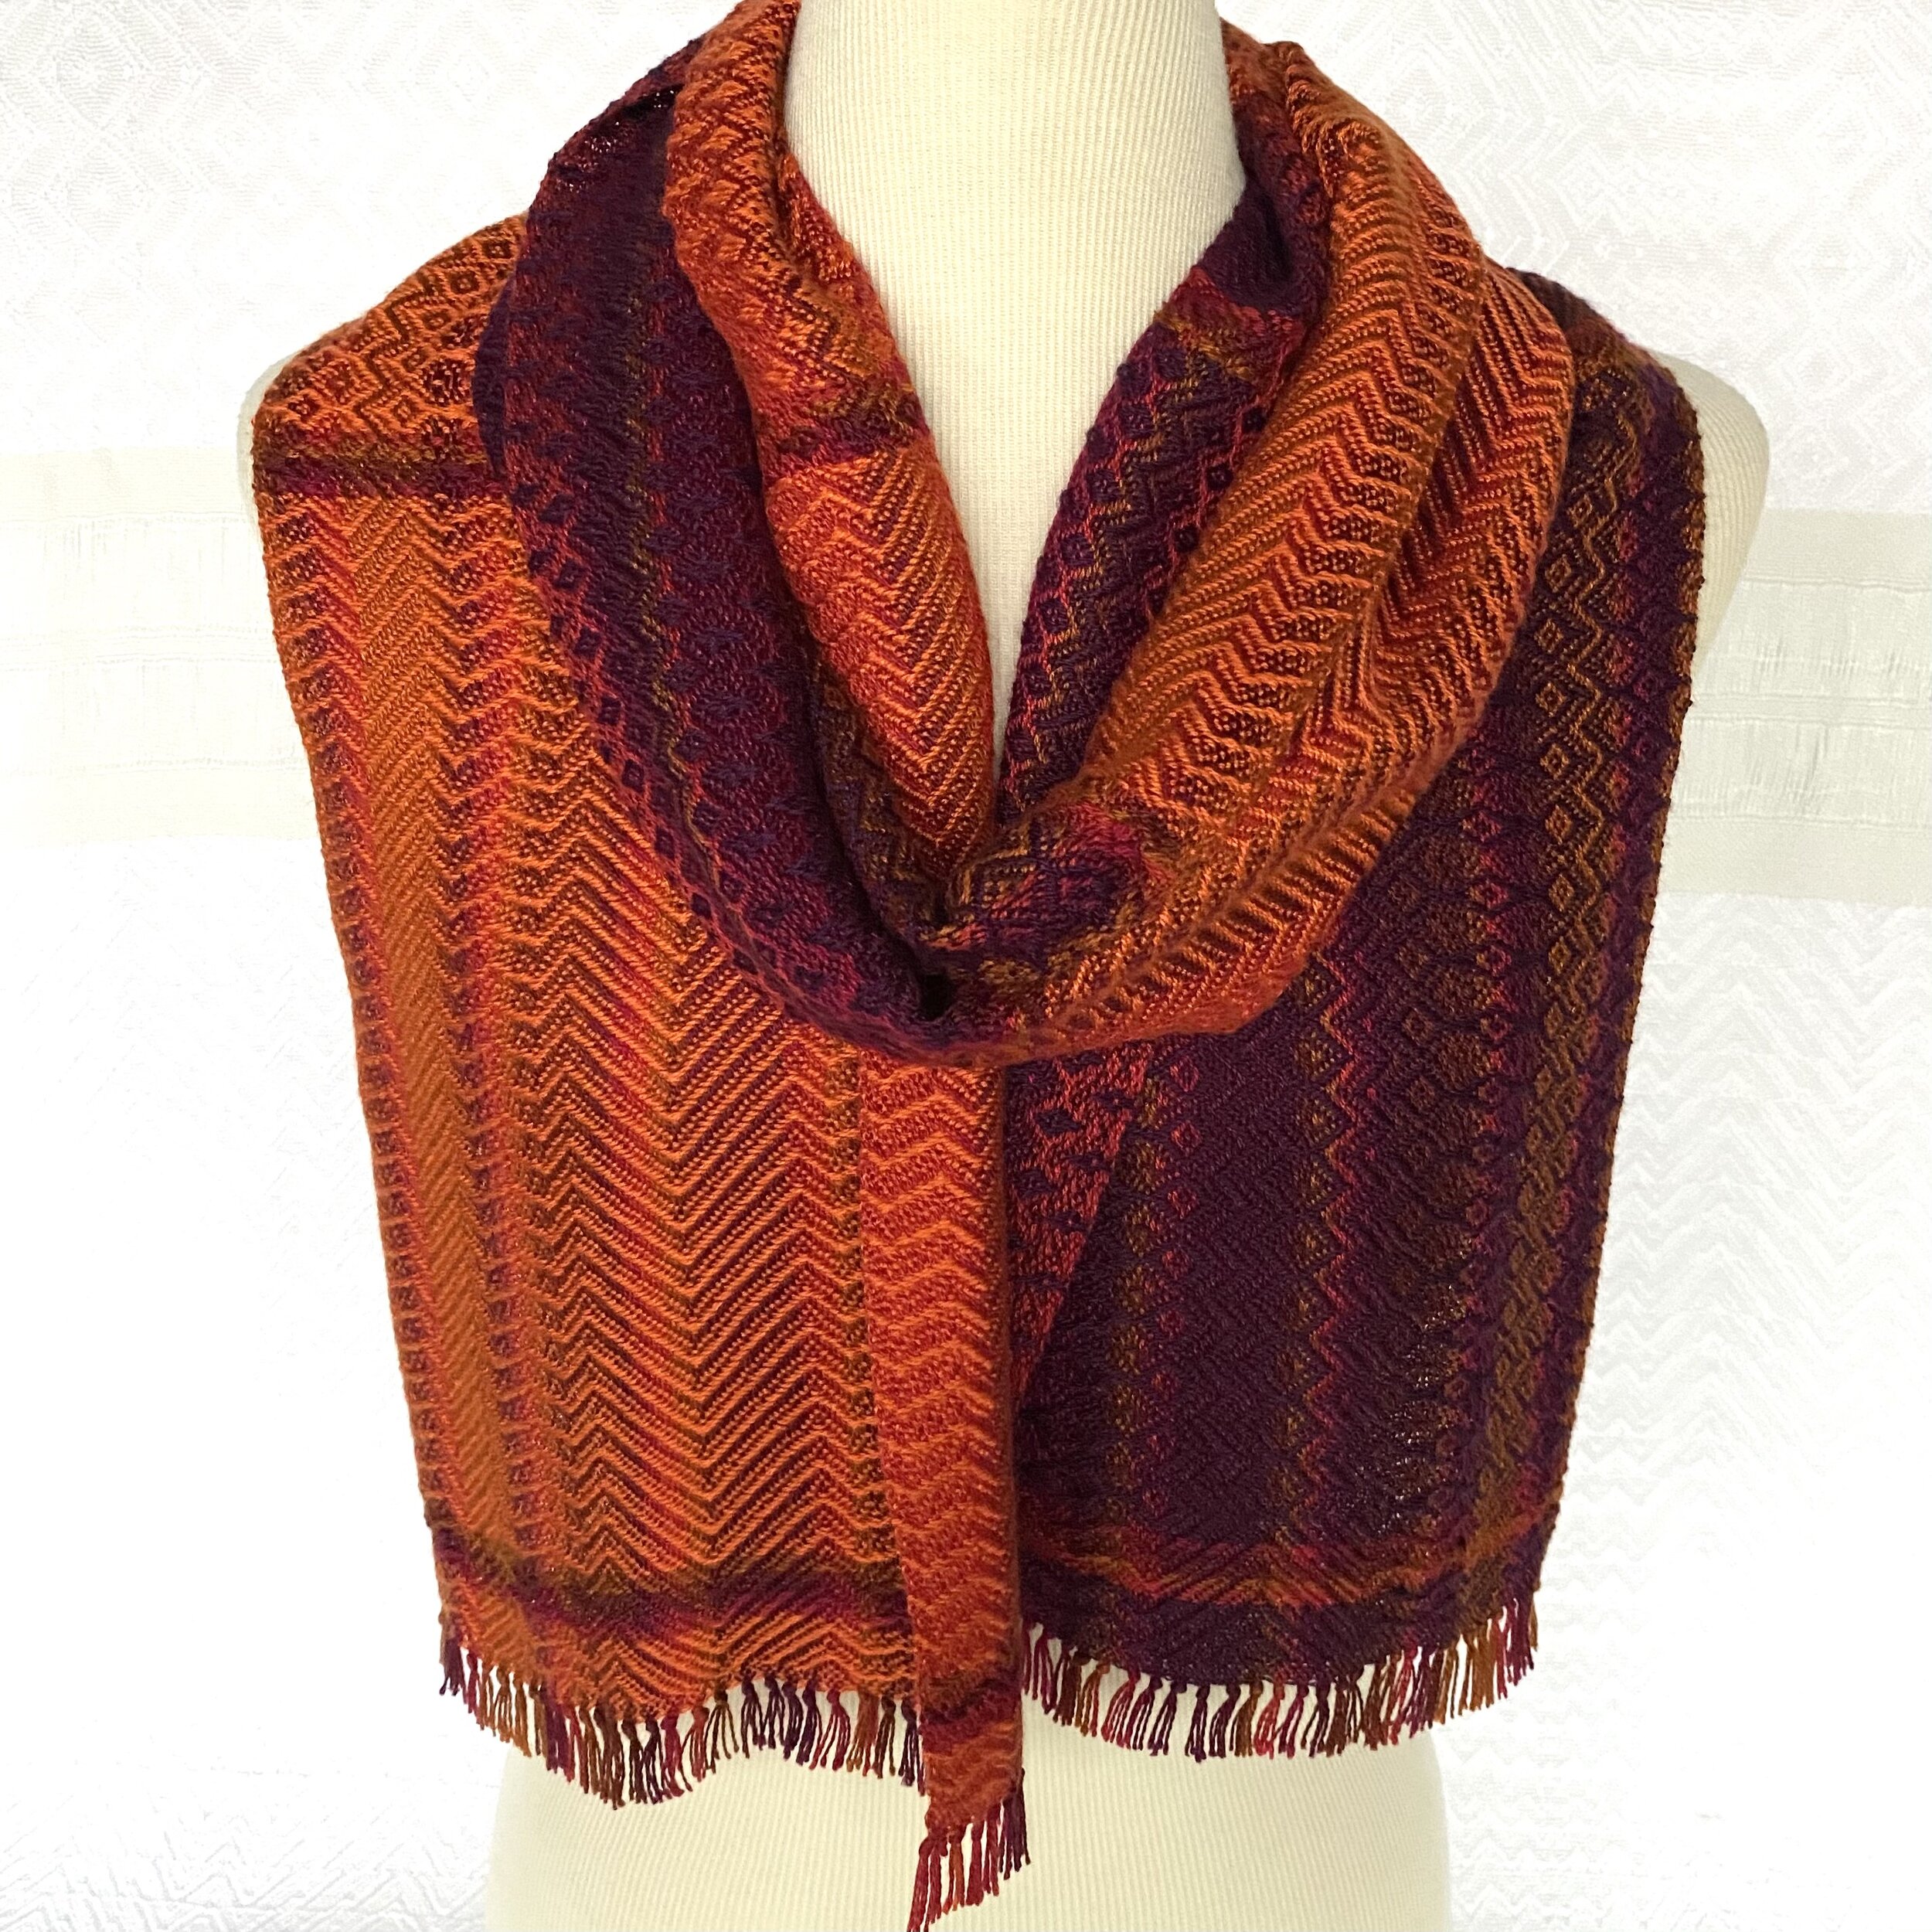  Stripes of Purple and Orange Handwoven Scarf   